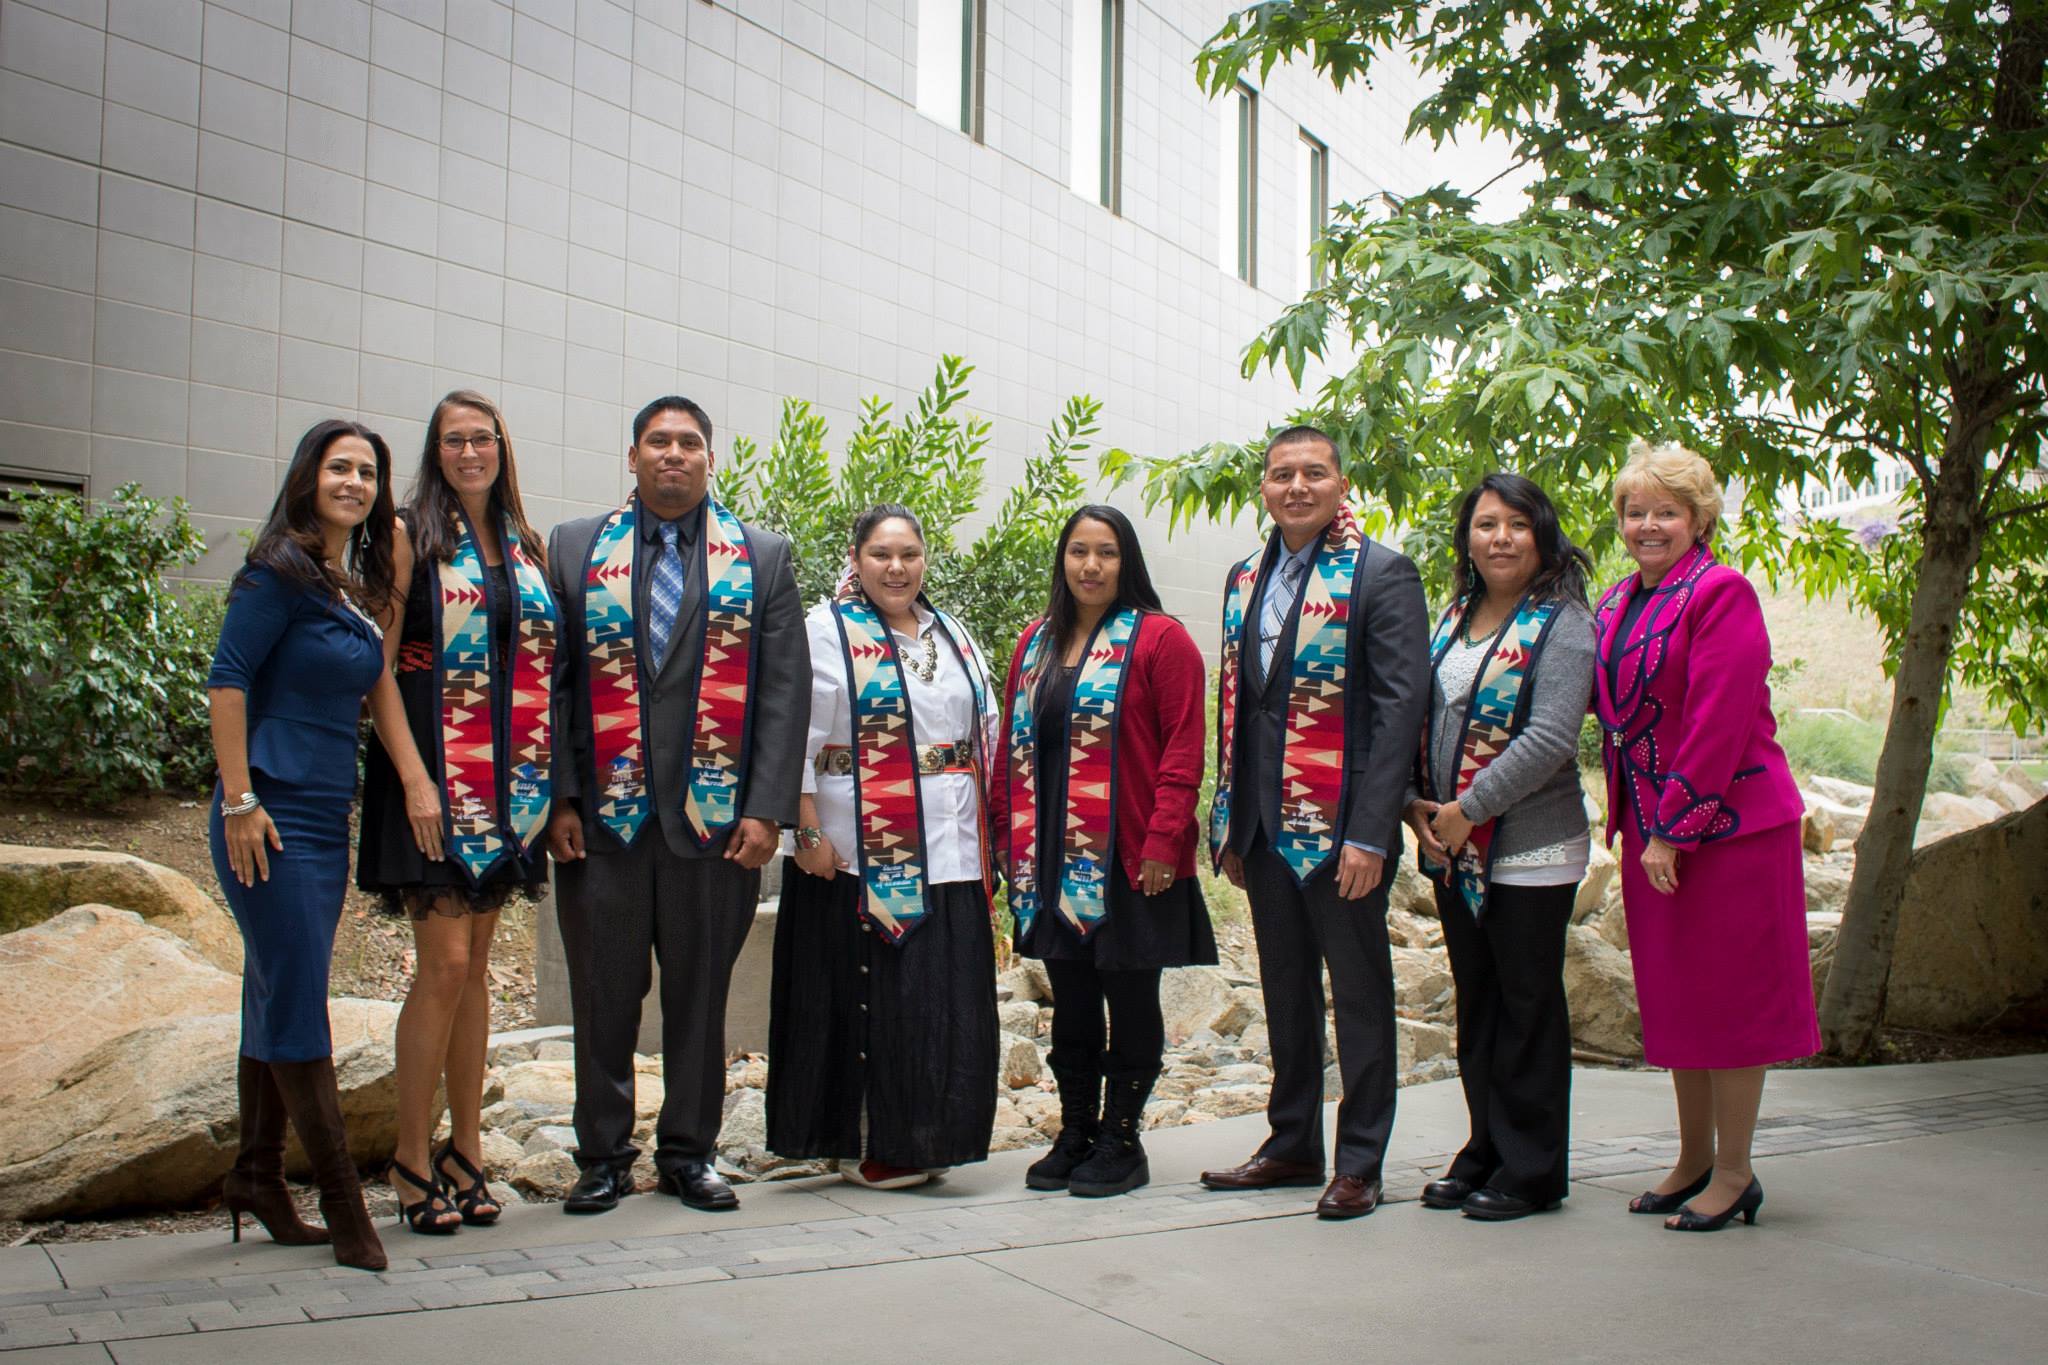 Group of American Indian graduates (as well as CICSC Director Dr. Joely Proudfit and CSUSM President Karen Haynes on either end) standing in a horizontal line wearing graduation stoles over their clothes, smiling at the camera, standing outside in front of greenery, rocks, and a white building wall